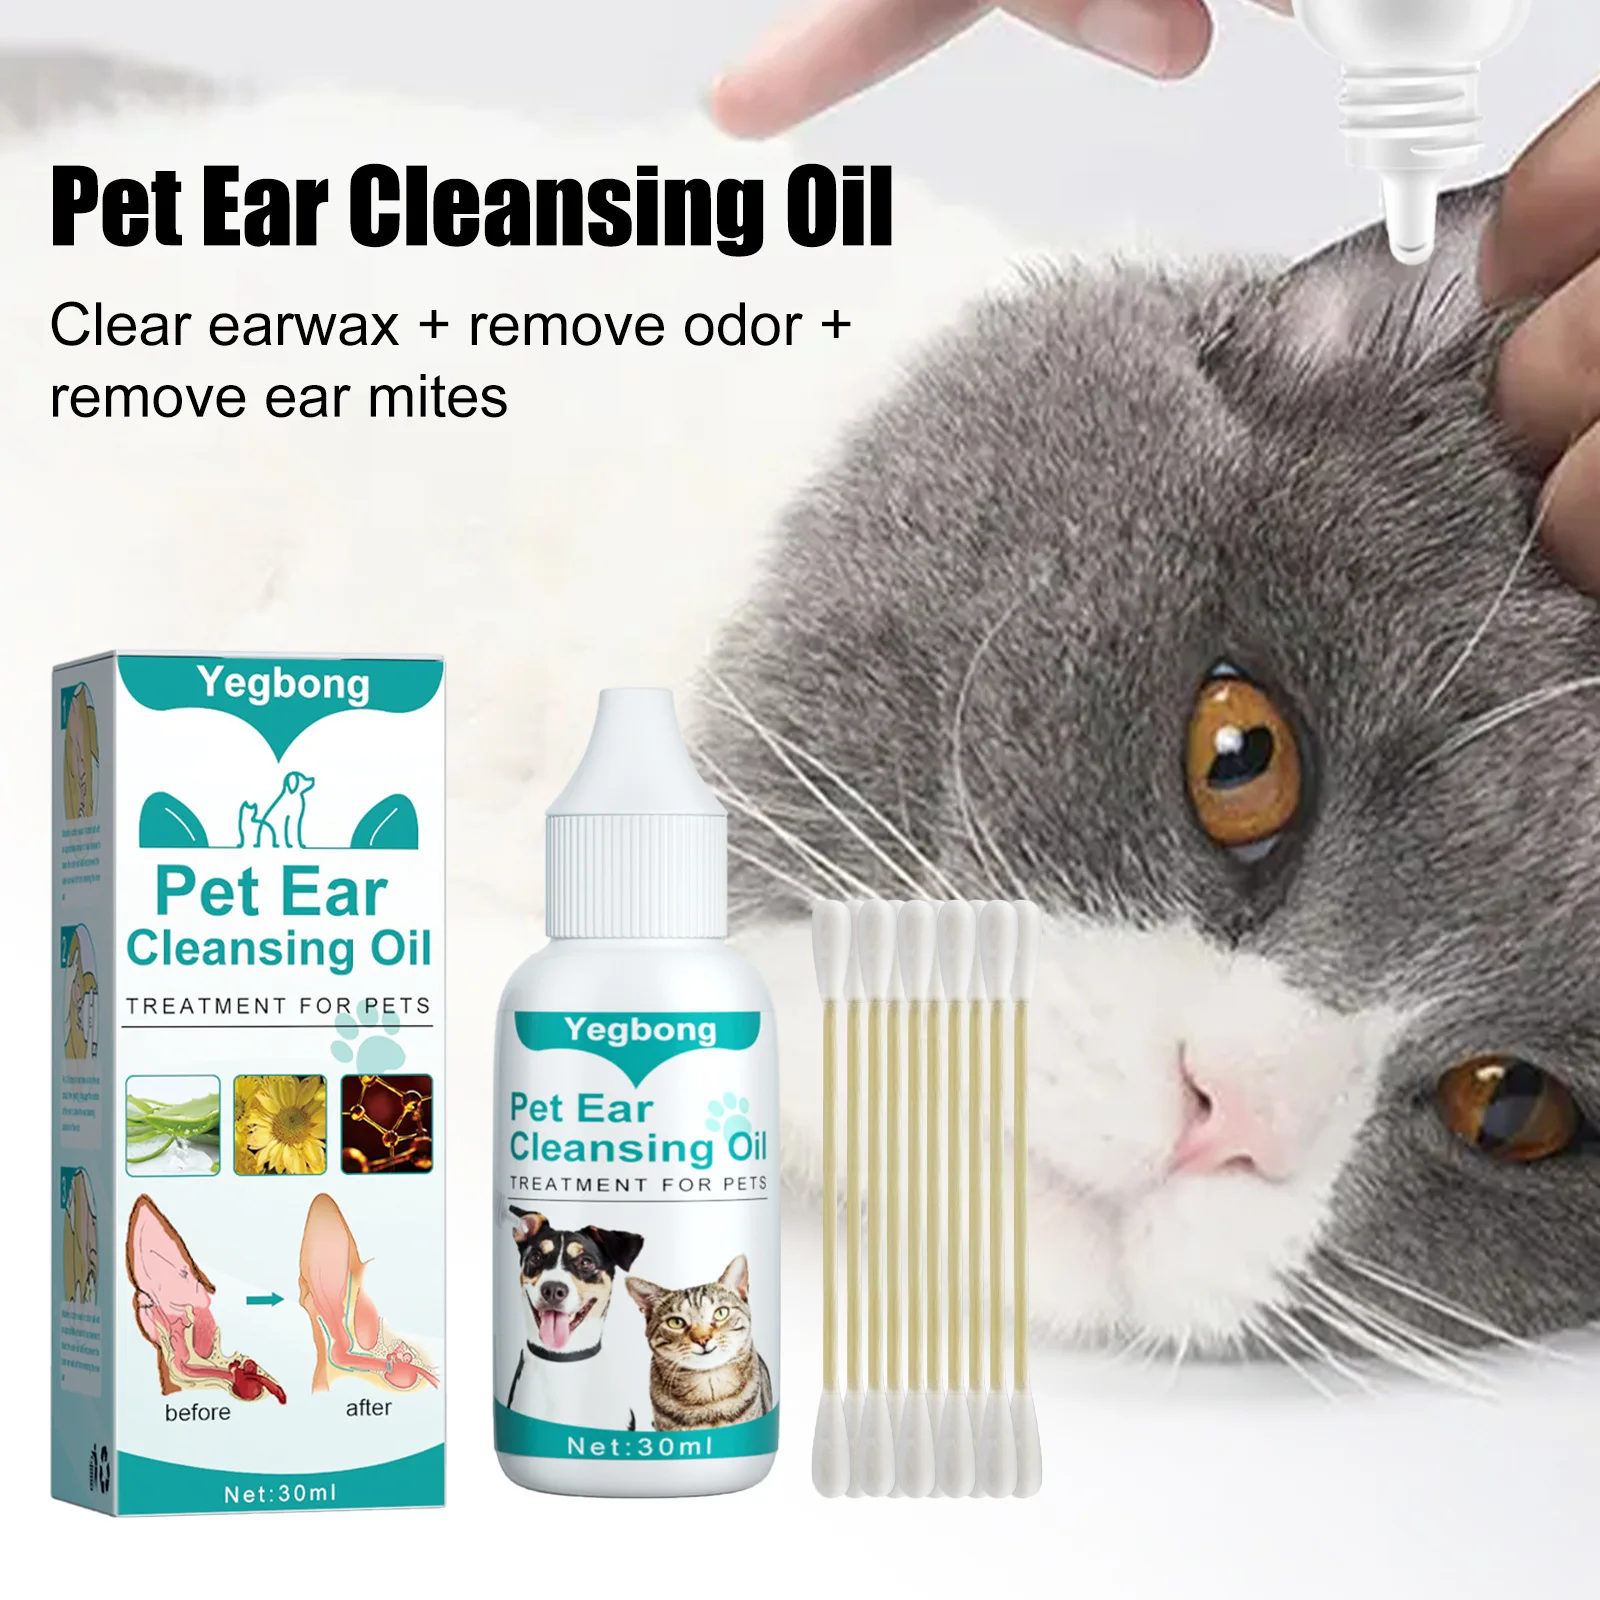 

Pet Ear Cleansing Oil Ear Cleaner for Dogs and Cats Removing Mites and Odors Effectively Cleanse Prevents Itching Pet Eye Care